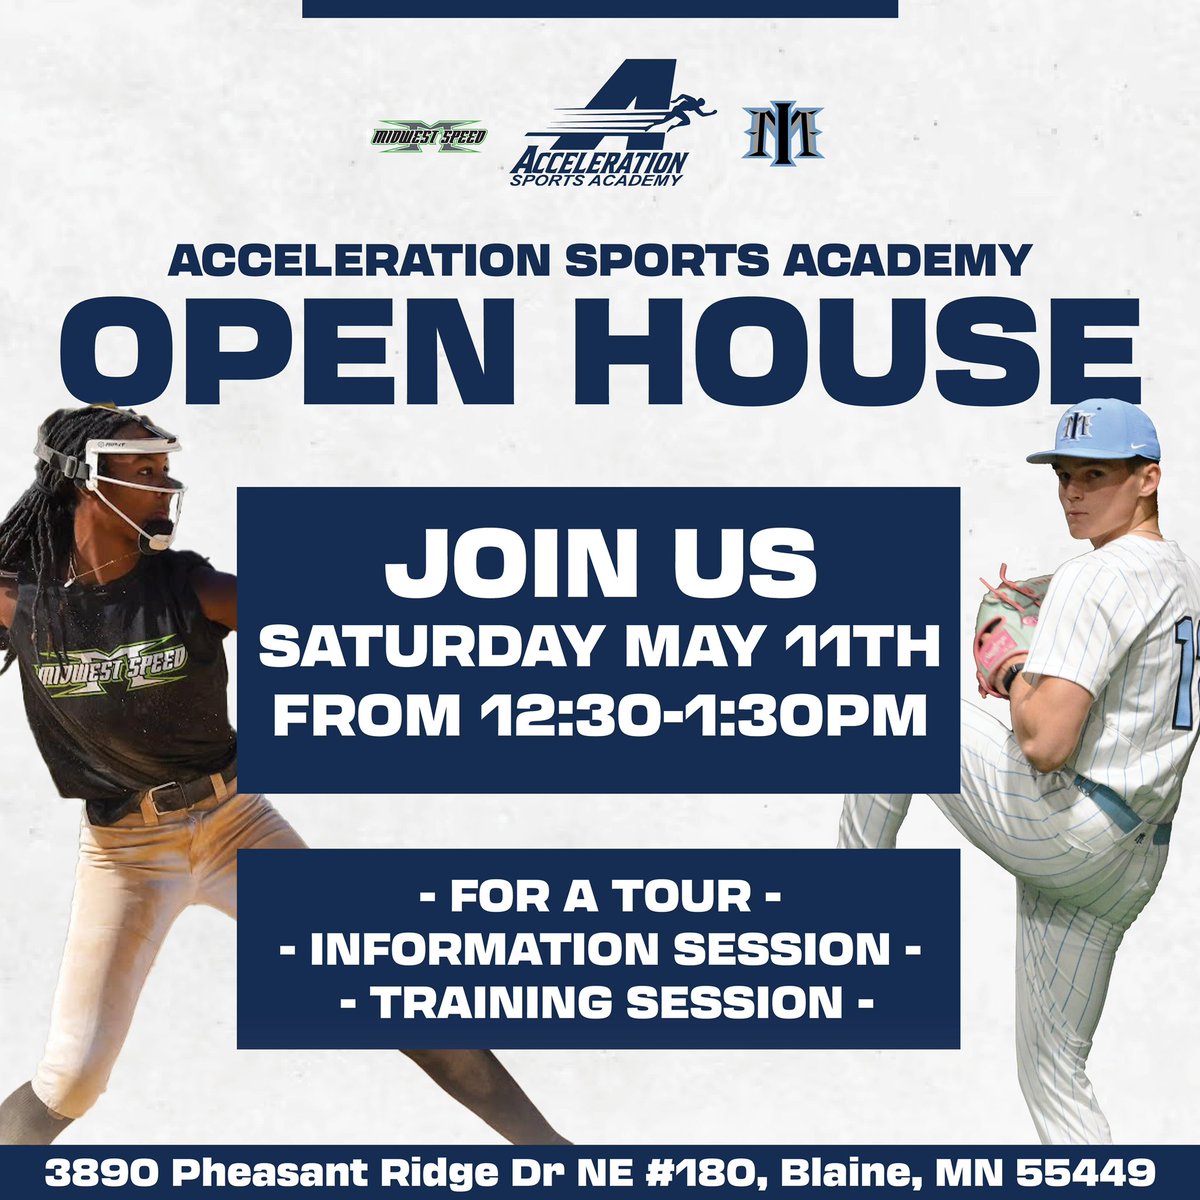 Acceleration Sports Academy will be having an open house after our summer parent meeting on Saturday May 11th. This event is open for everyone so if you are interested in ASA come to the open house for a tour, an information session, and a training session!

#icemenexperience